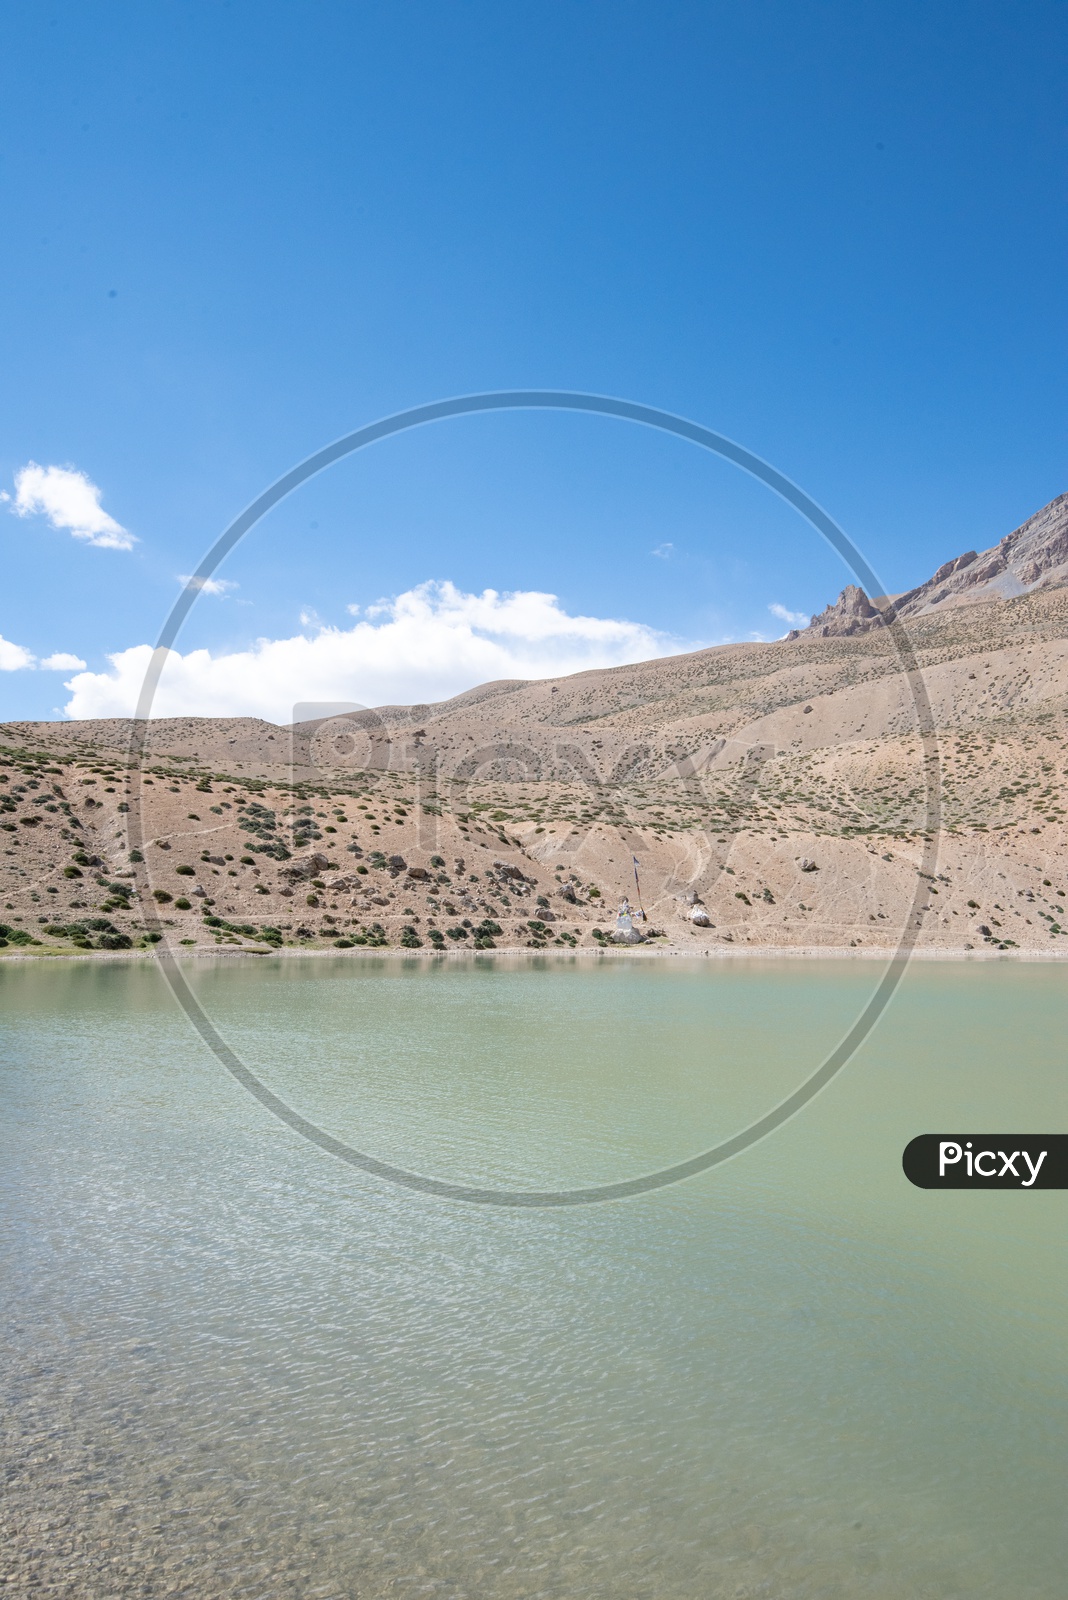 Dhankar lake with barren mountains in the background